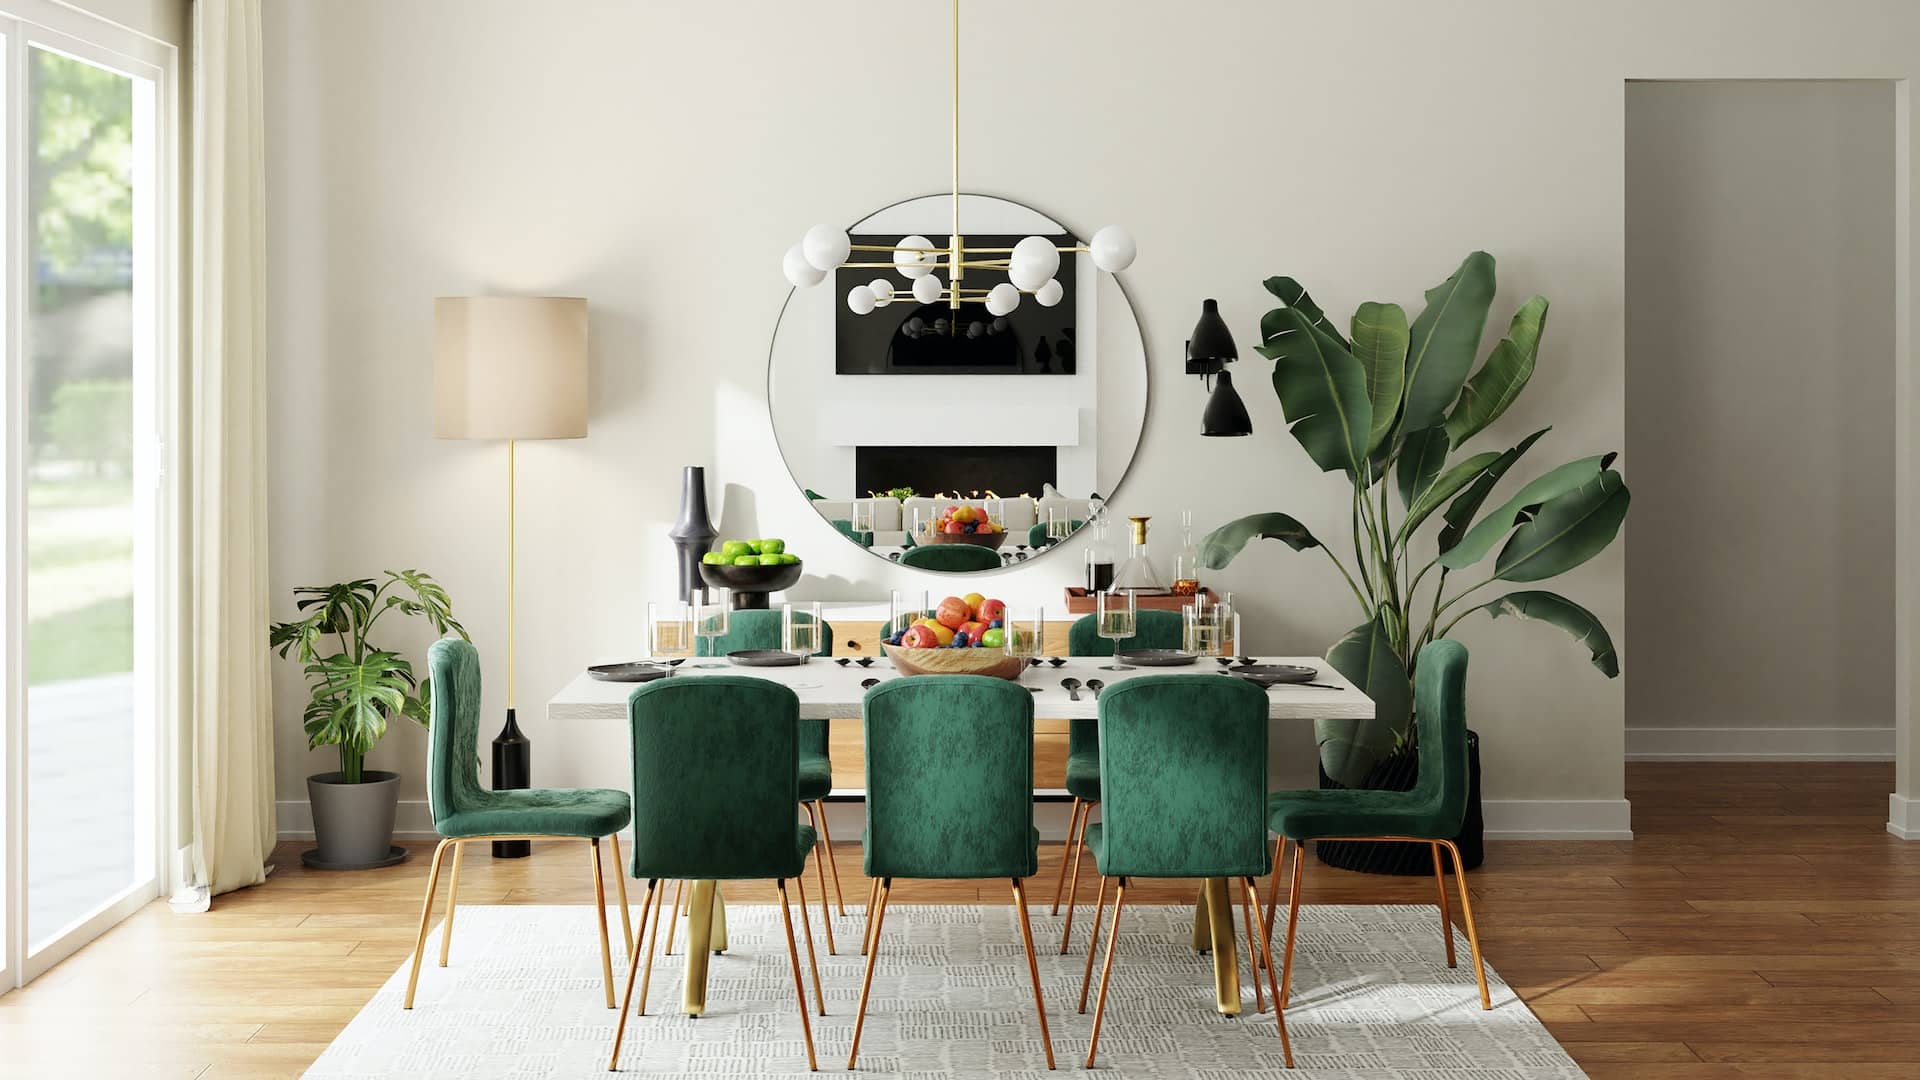 Choosing your dining room furniture